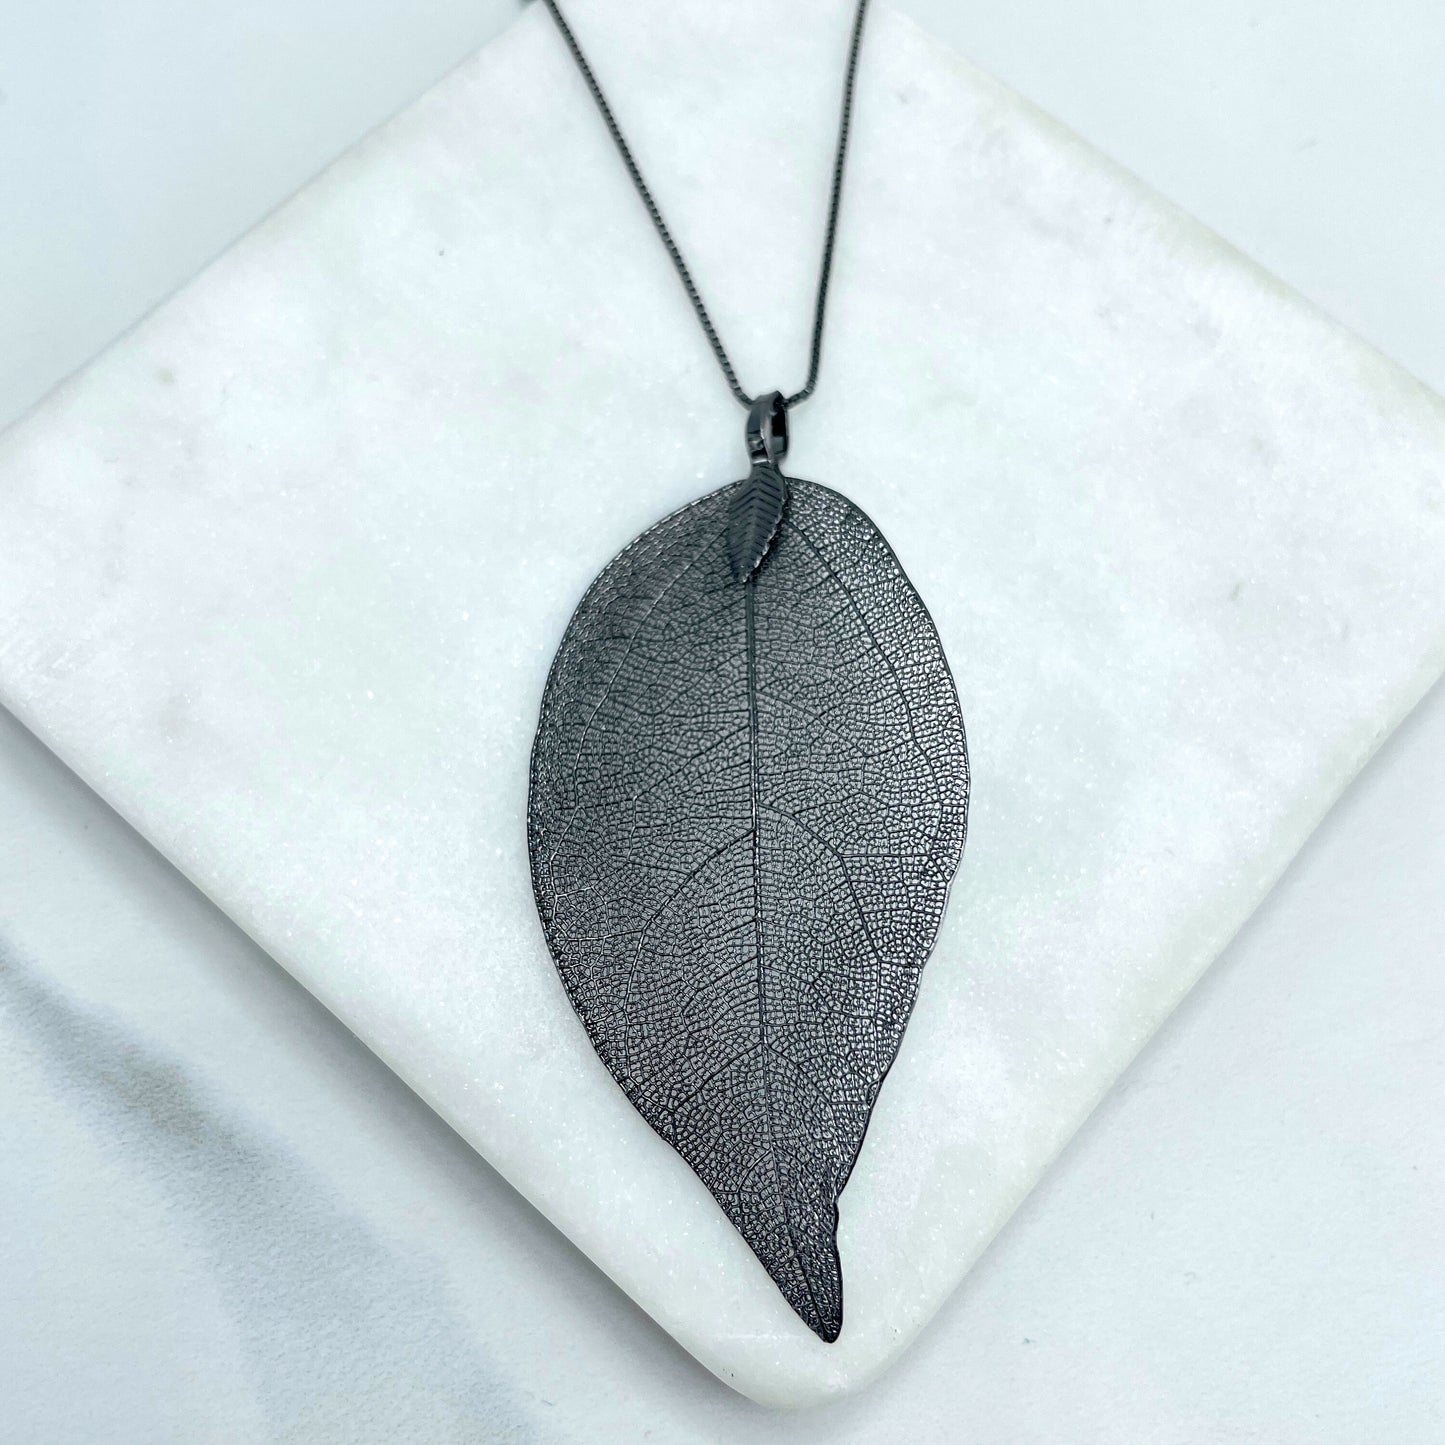 Black Gold Filled Pendants Hand Made with Real Leaf or Black Box Chain, Wholesale Jewelry Making Supplies